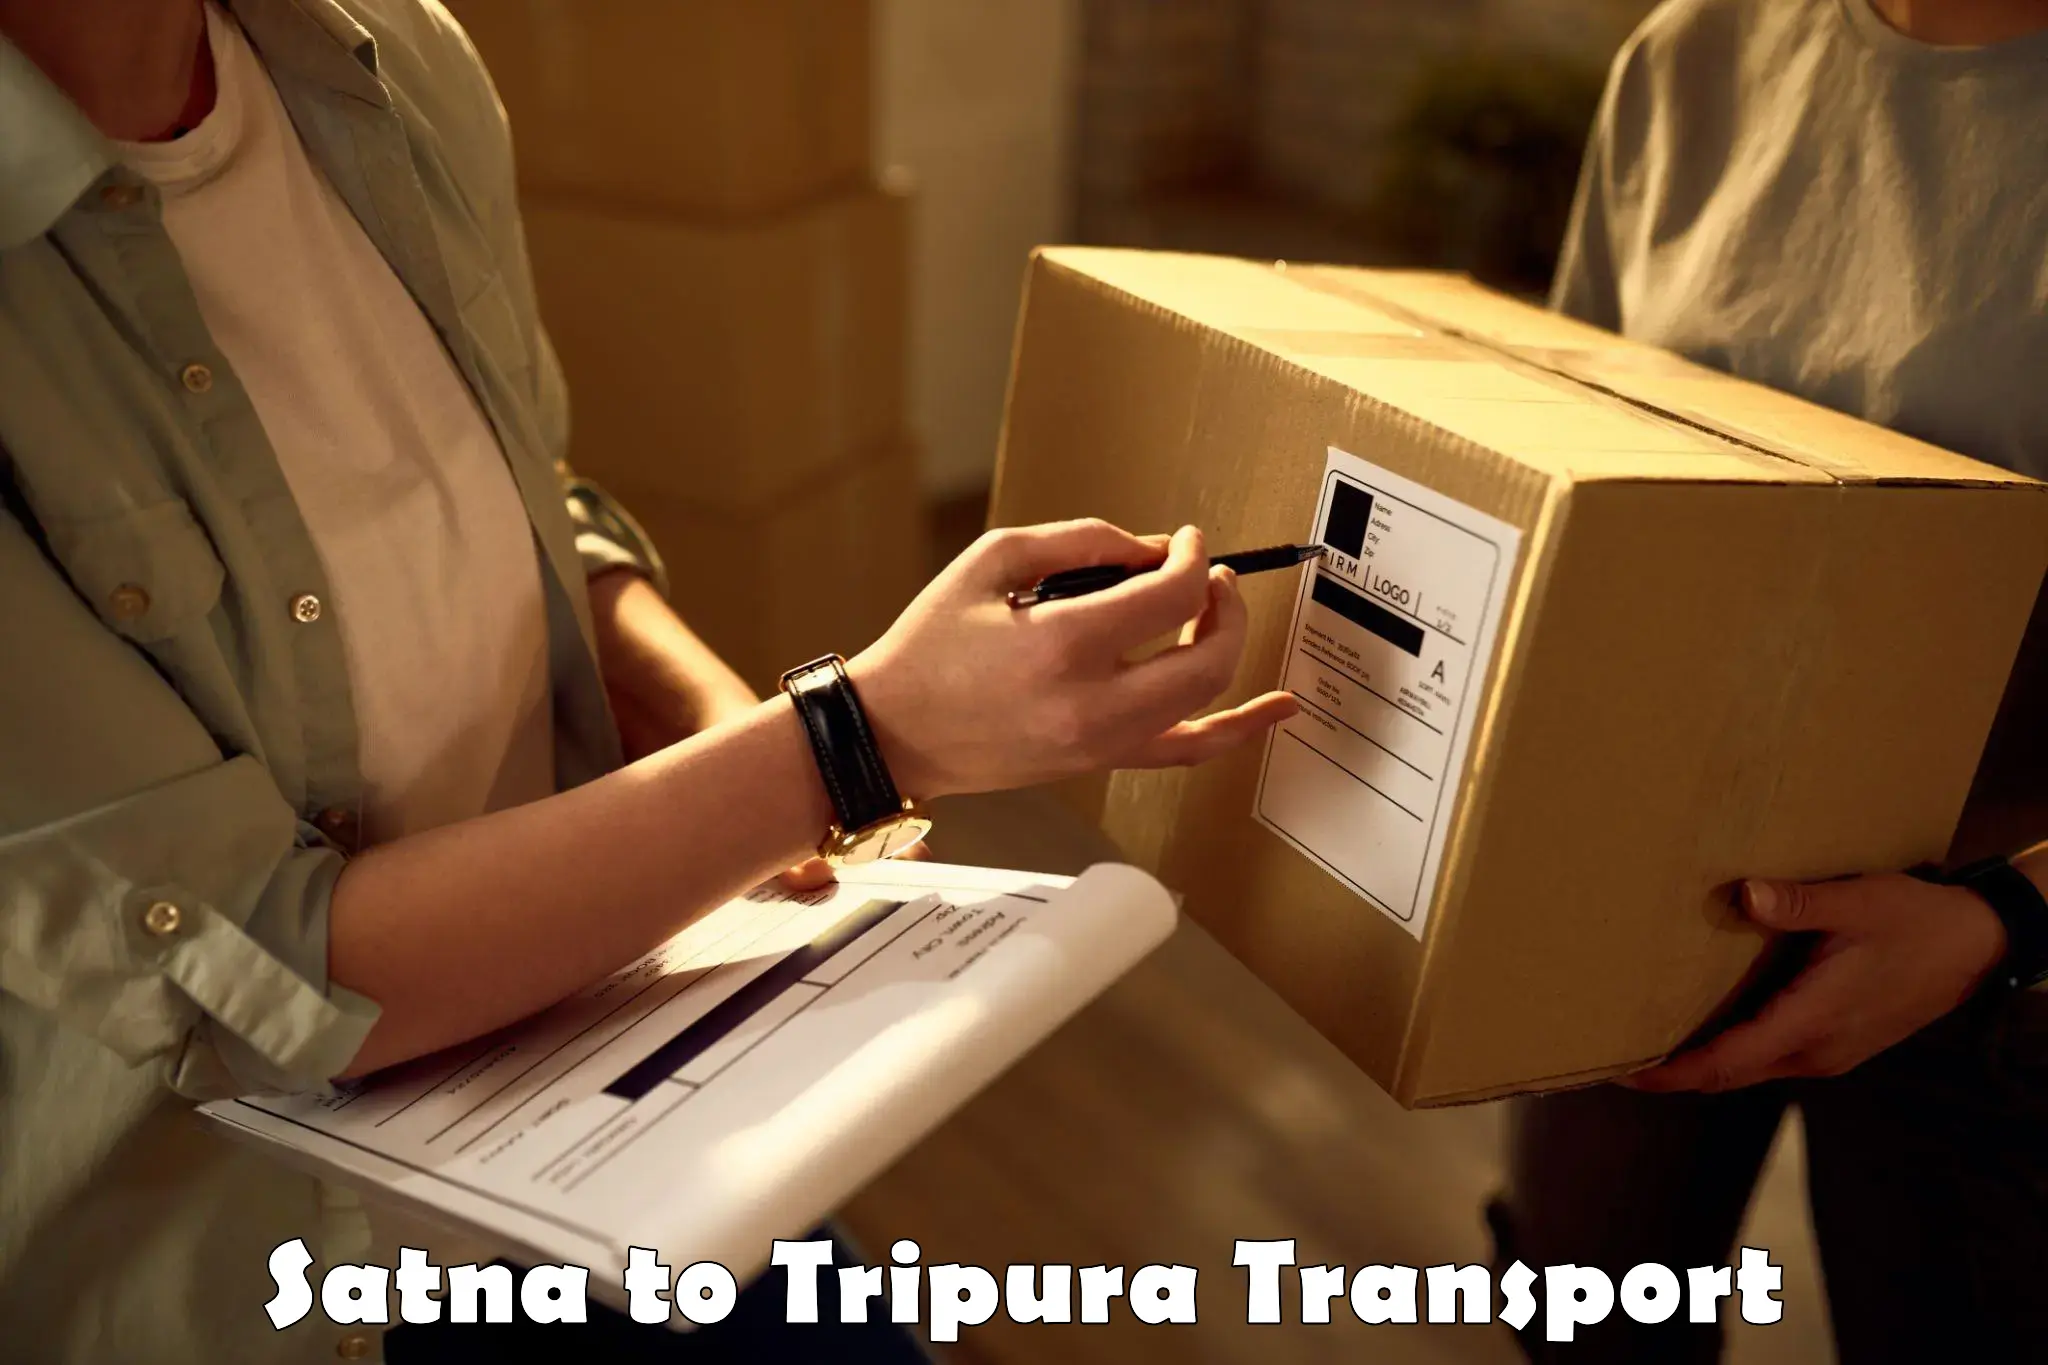 Air freight transport services Satna to Udaipur Tripura